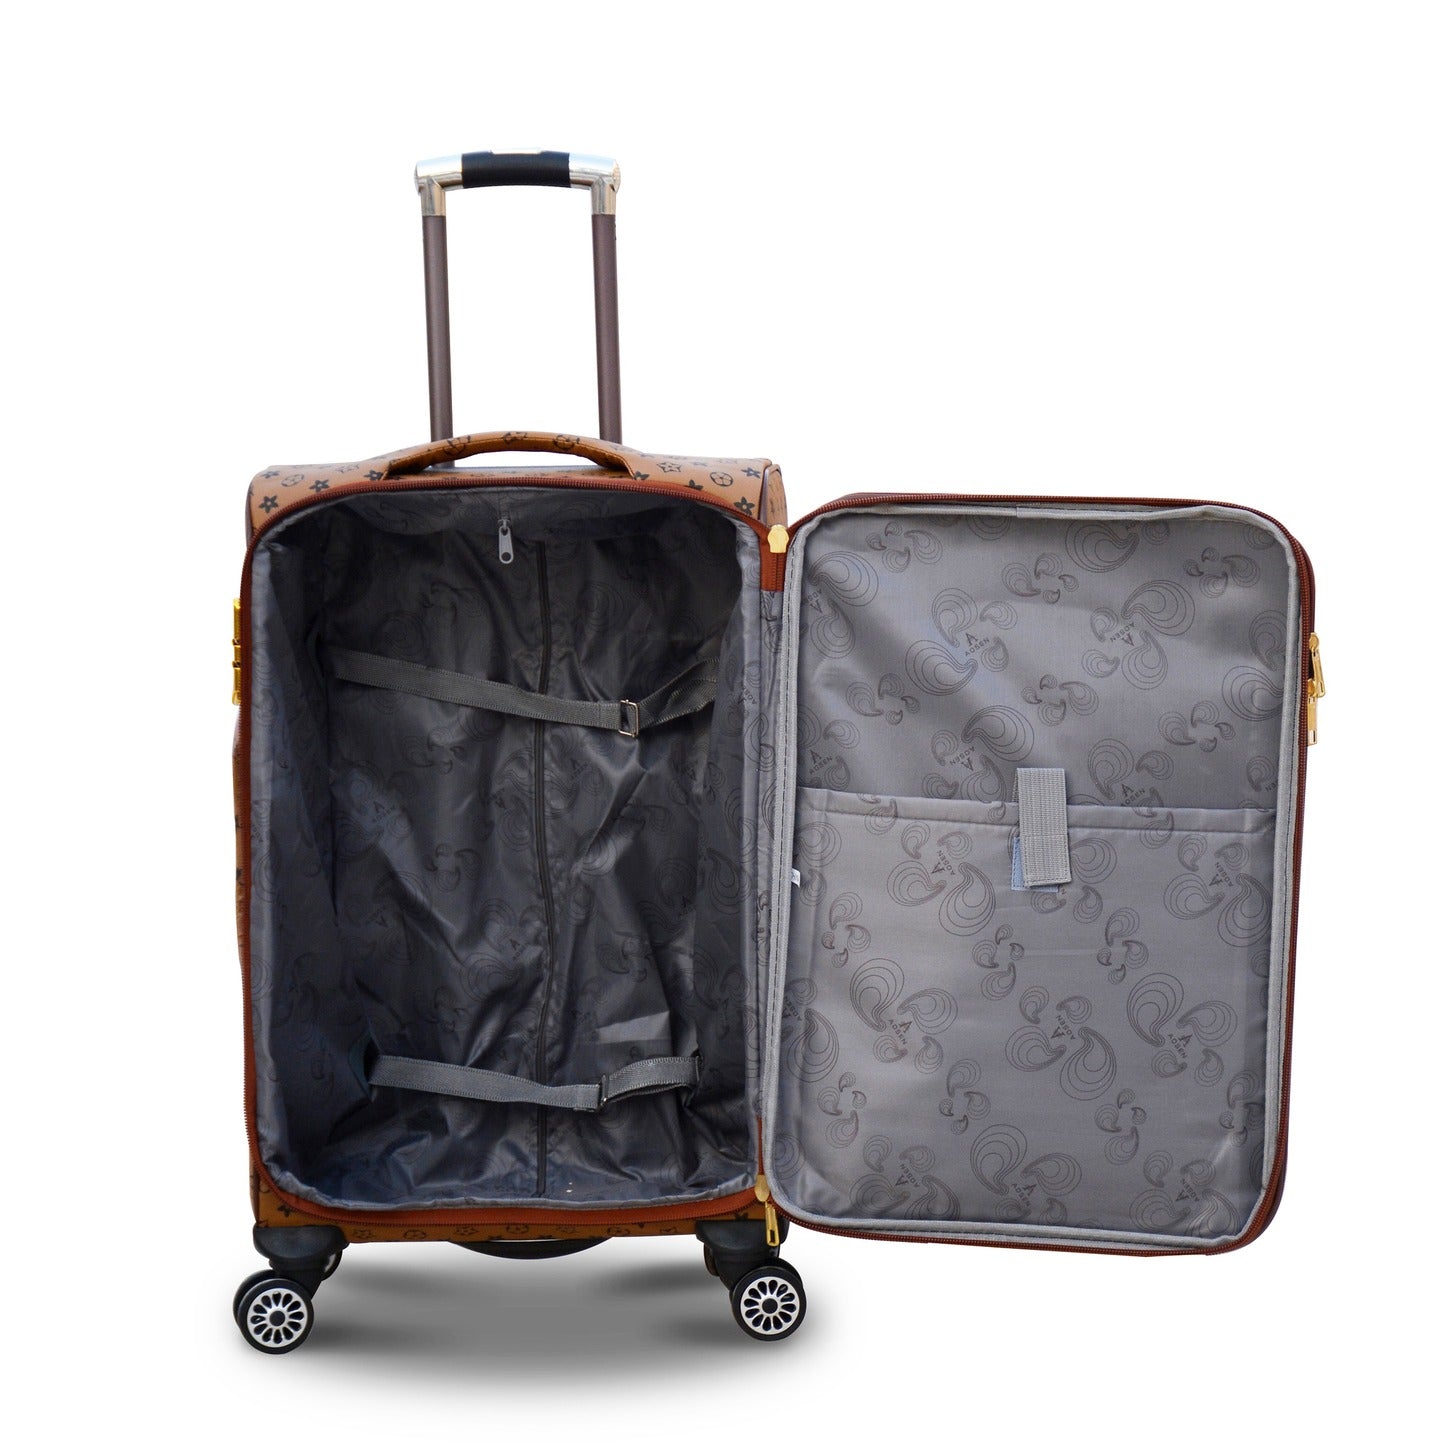 28" Light Brown Colour LVR PU Leather Luggage Lightweight Trolley Bag with Spinner Wheel